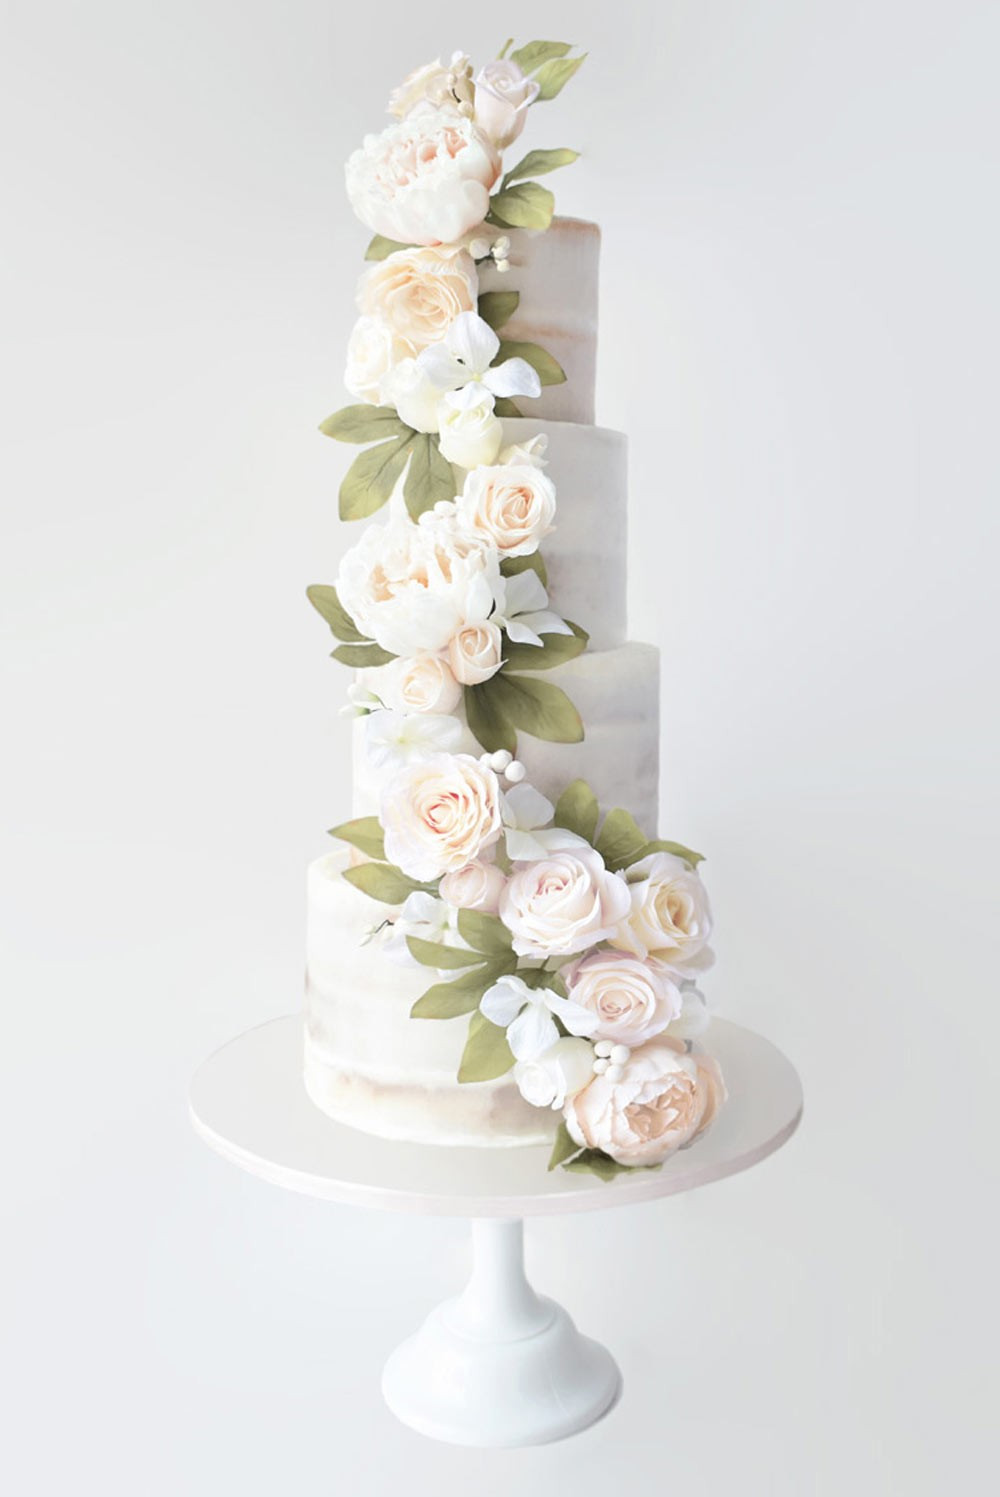 Average Cost For Wedding Cake
 Wedding Cake Prices Guide for bud s from £100 to over £